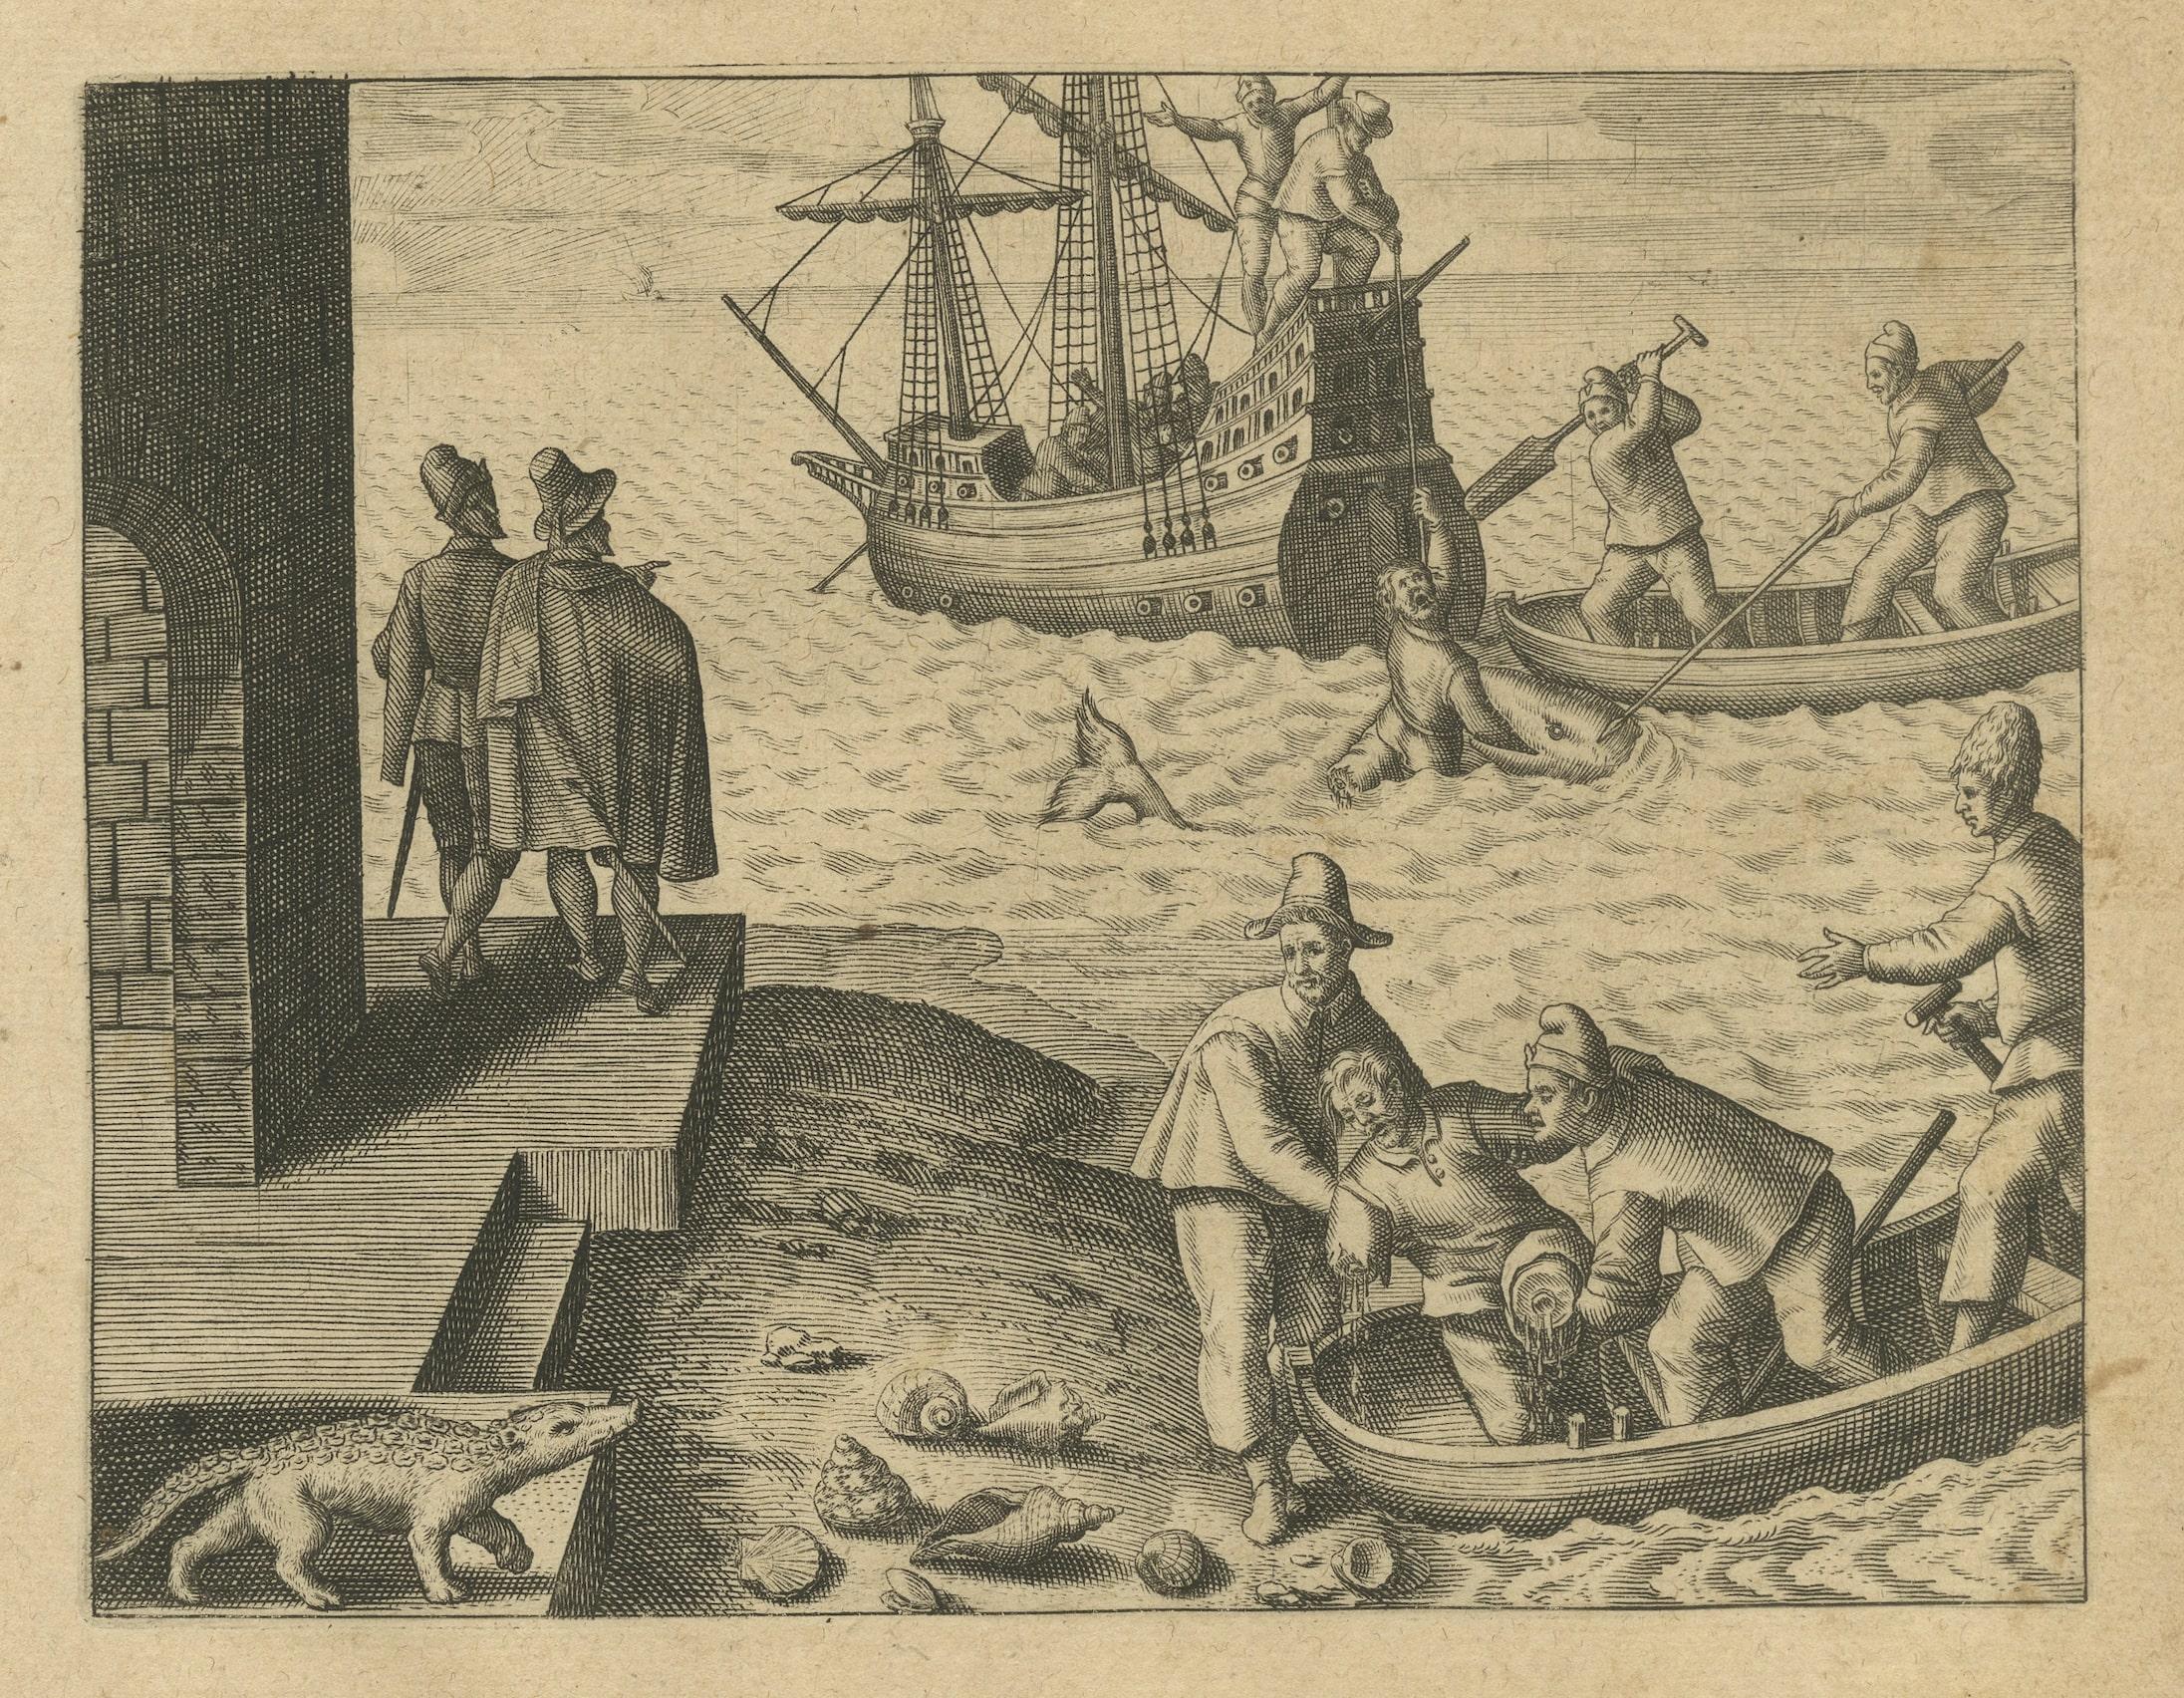 Engraved The de Bry Engraving of Maritime Marvels of Dutch Seafarers at Cochin, 1601 For Sale